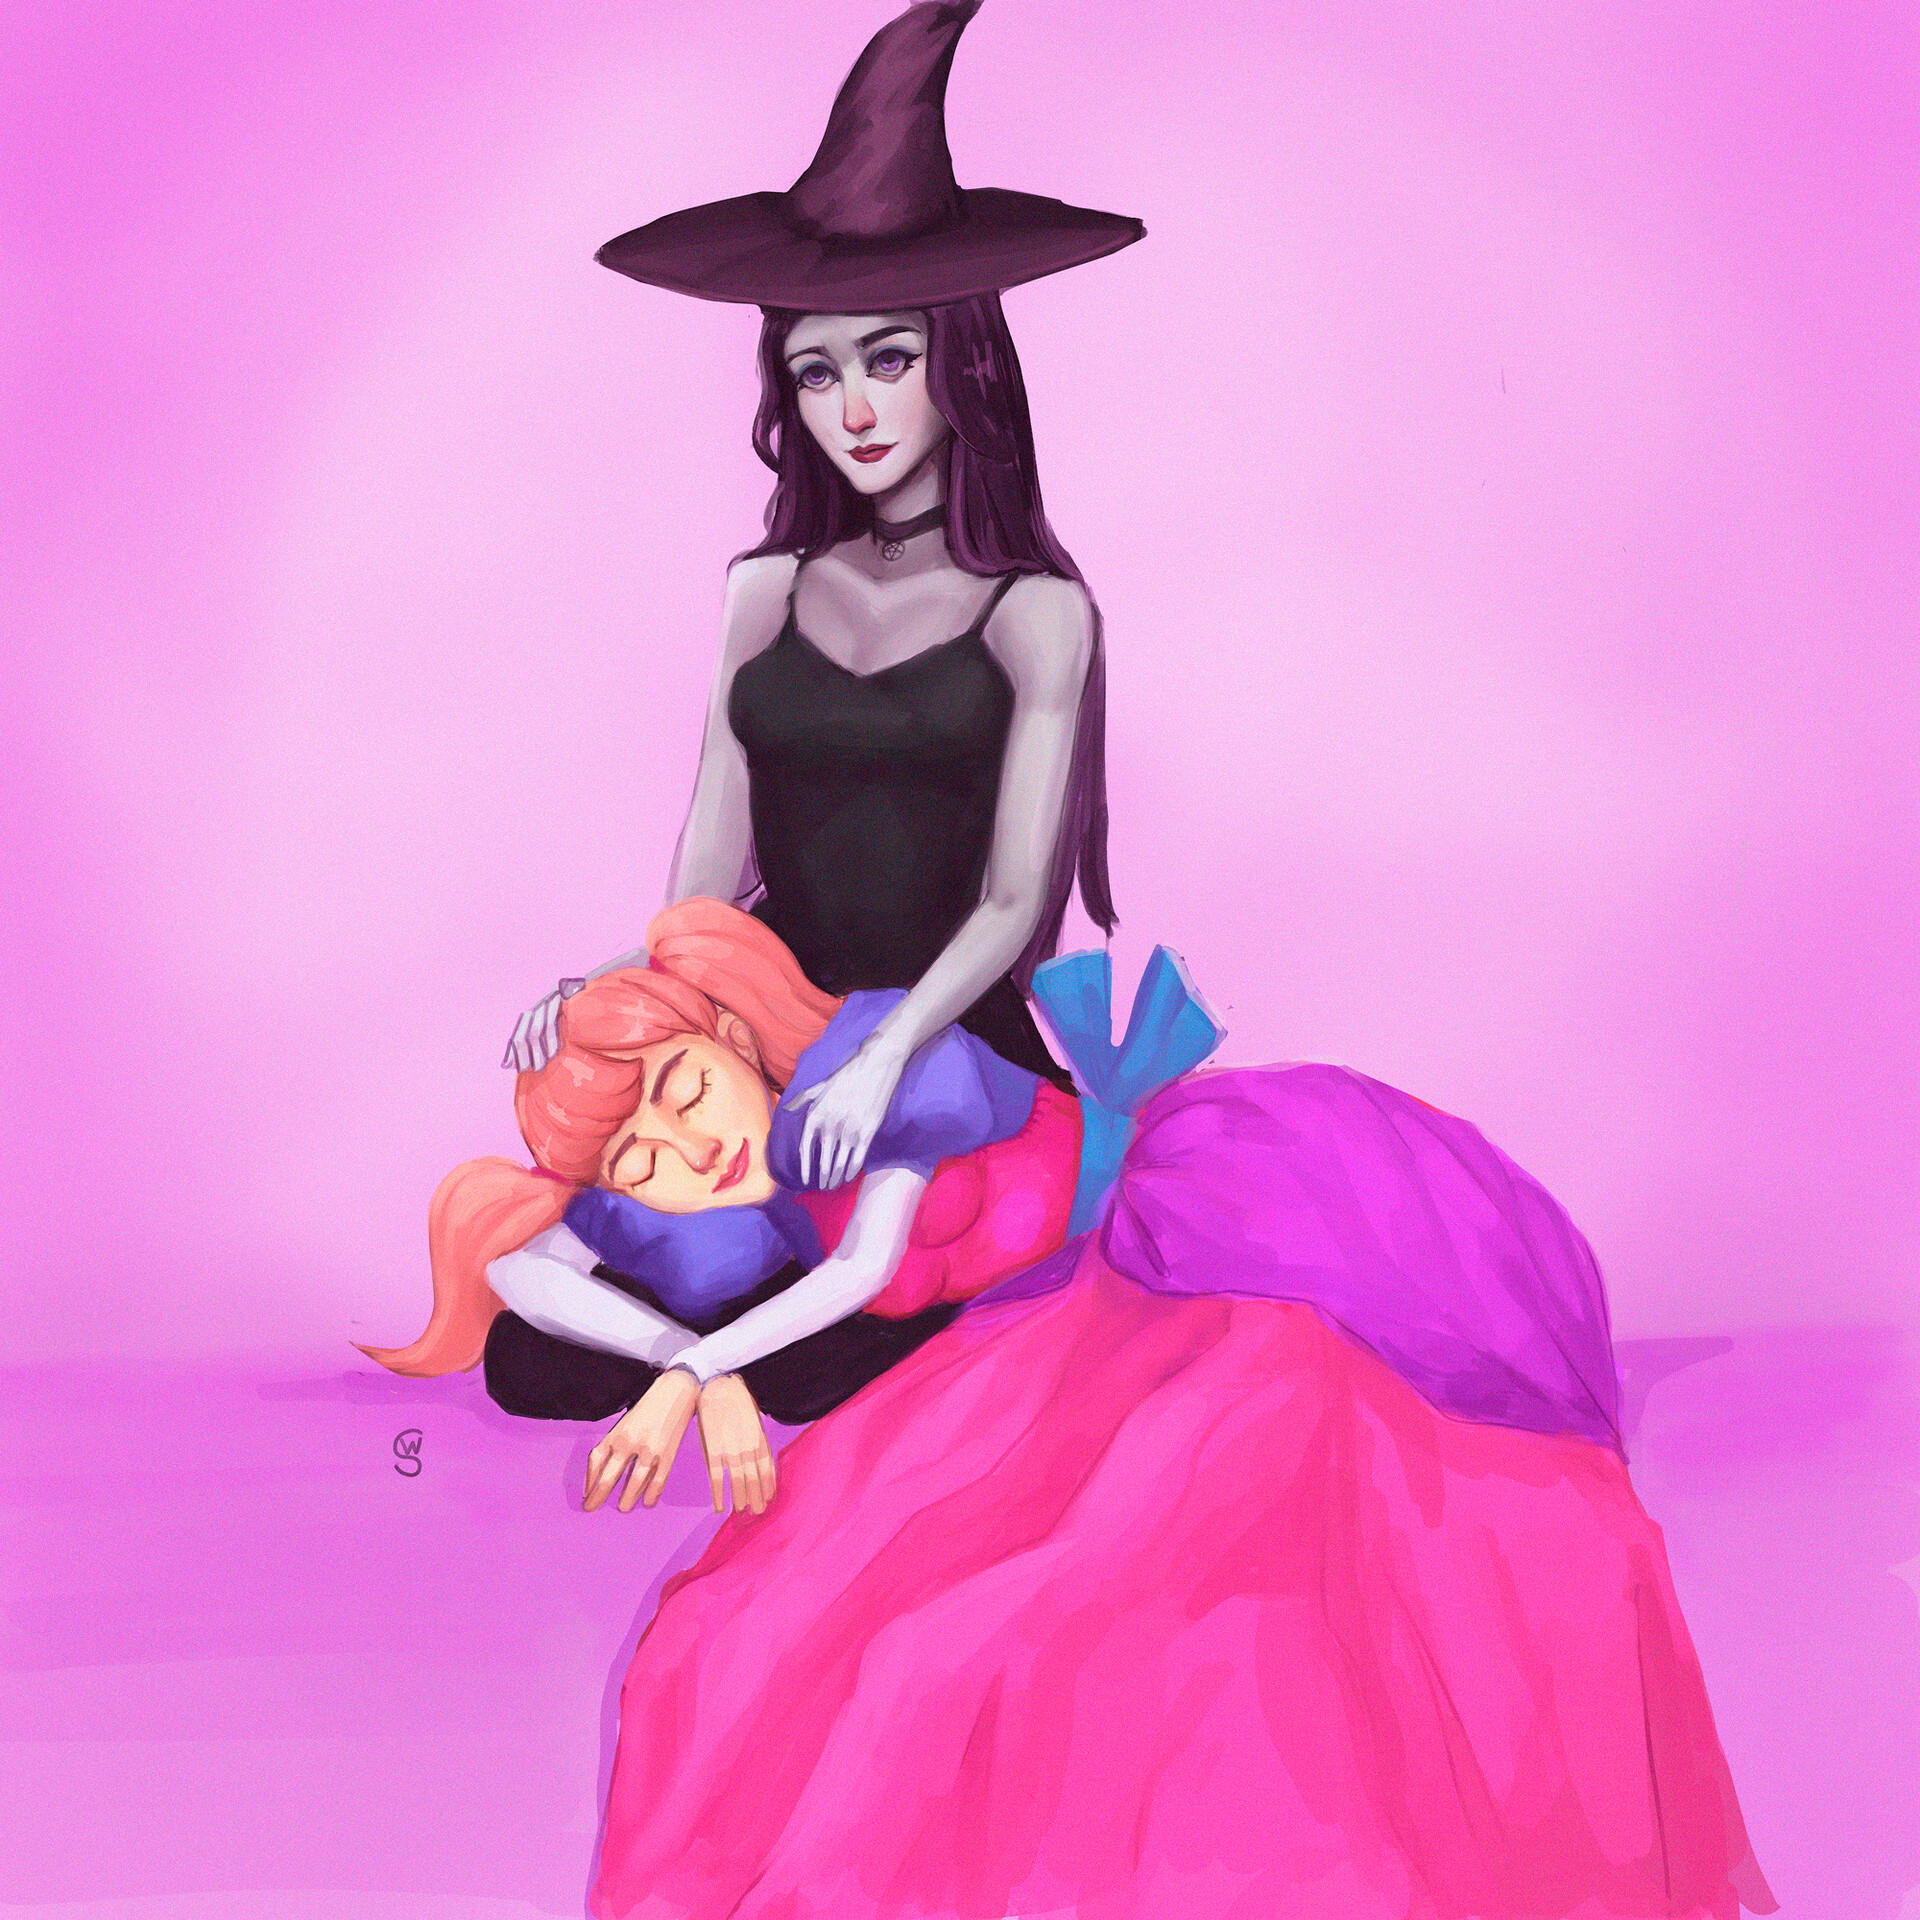 The Princess and the Witch